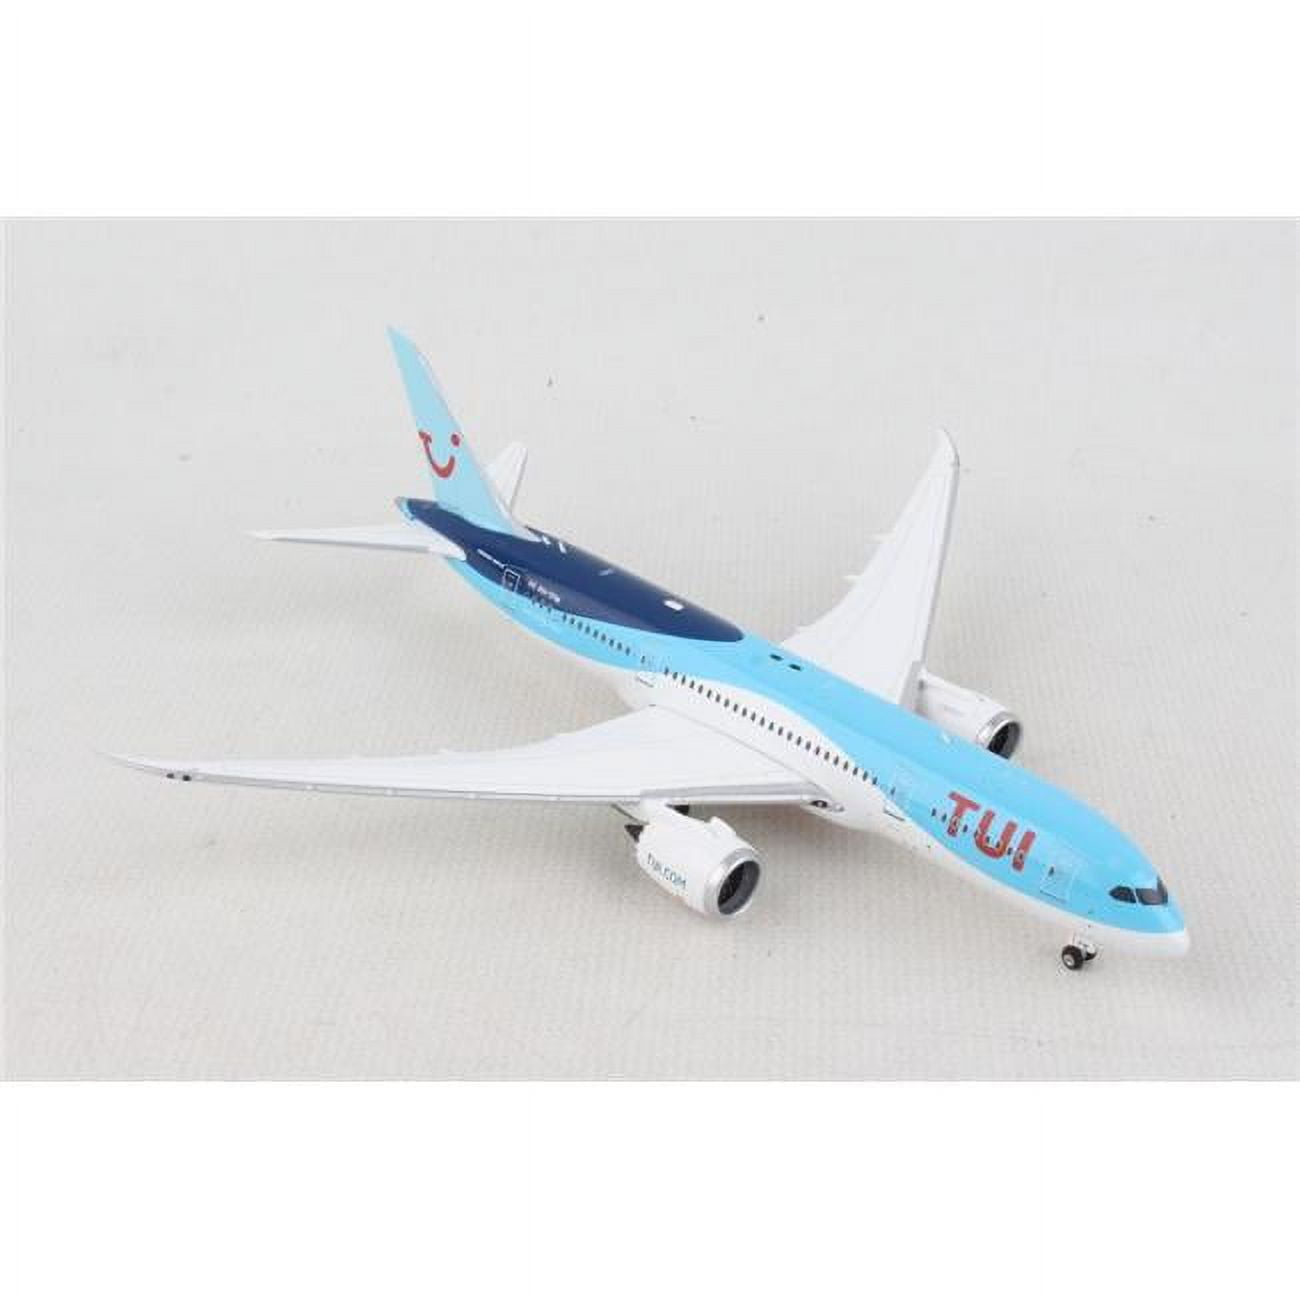 Picture of Phoenix PH2212 1-400 Scale Registration No.PH-TFM Phoenix Tuifly 787-8 Netherlands Model Aircraft Toy